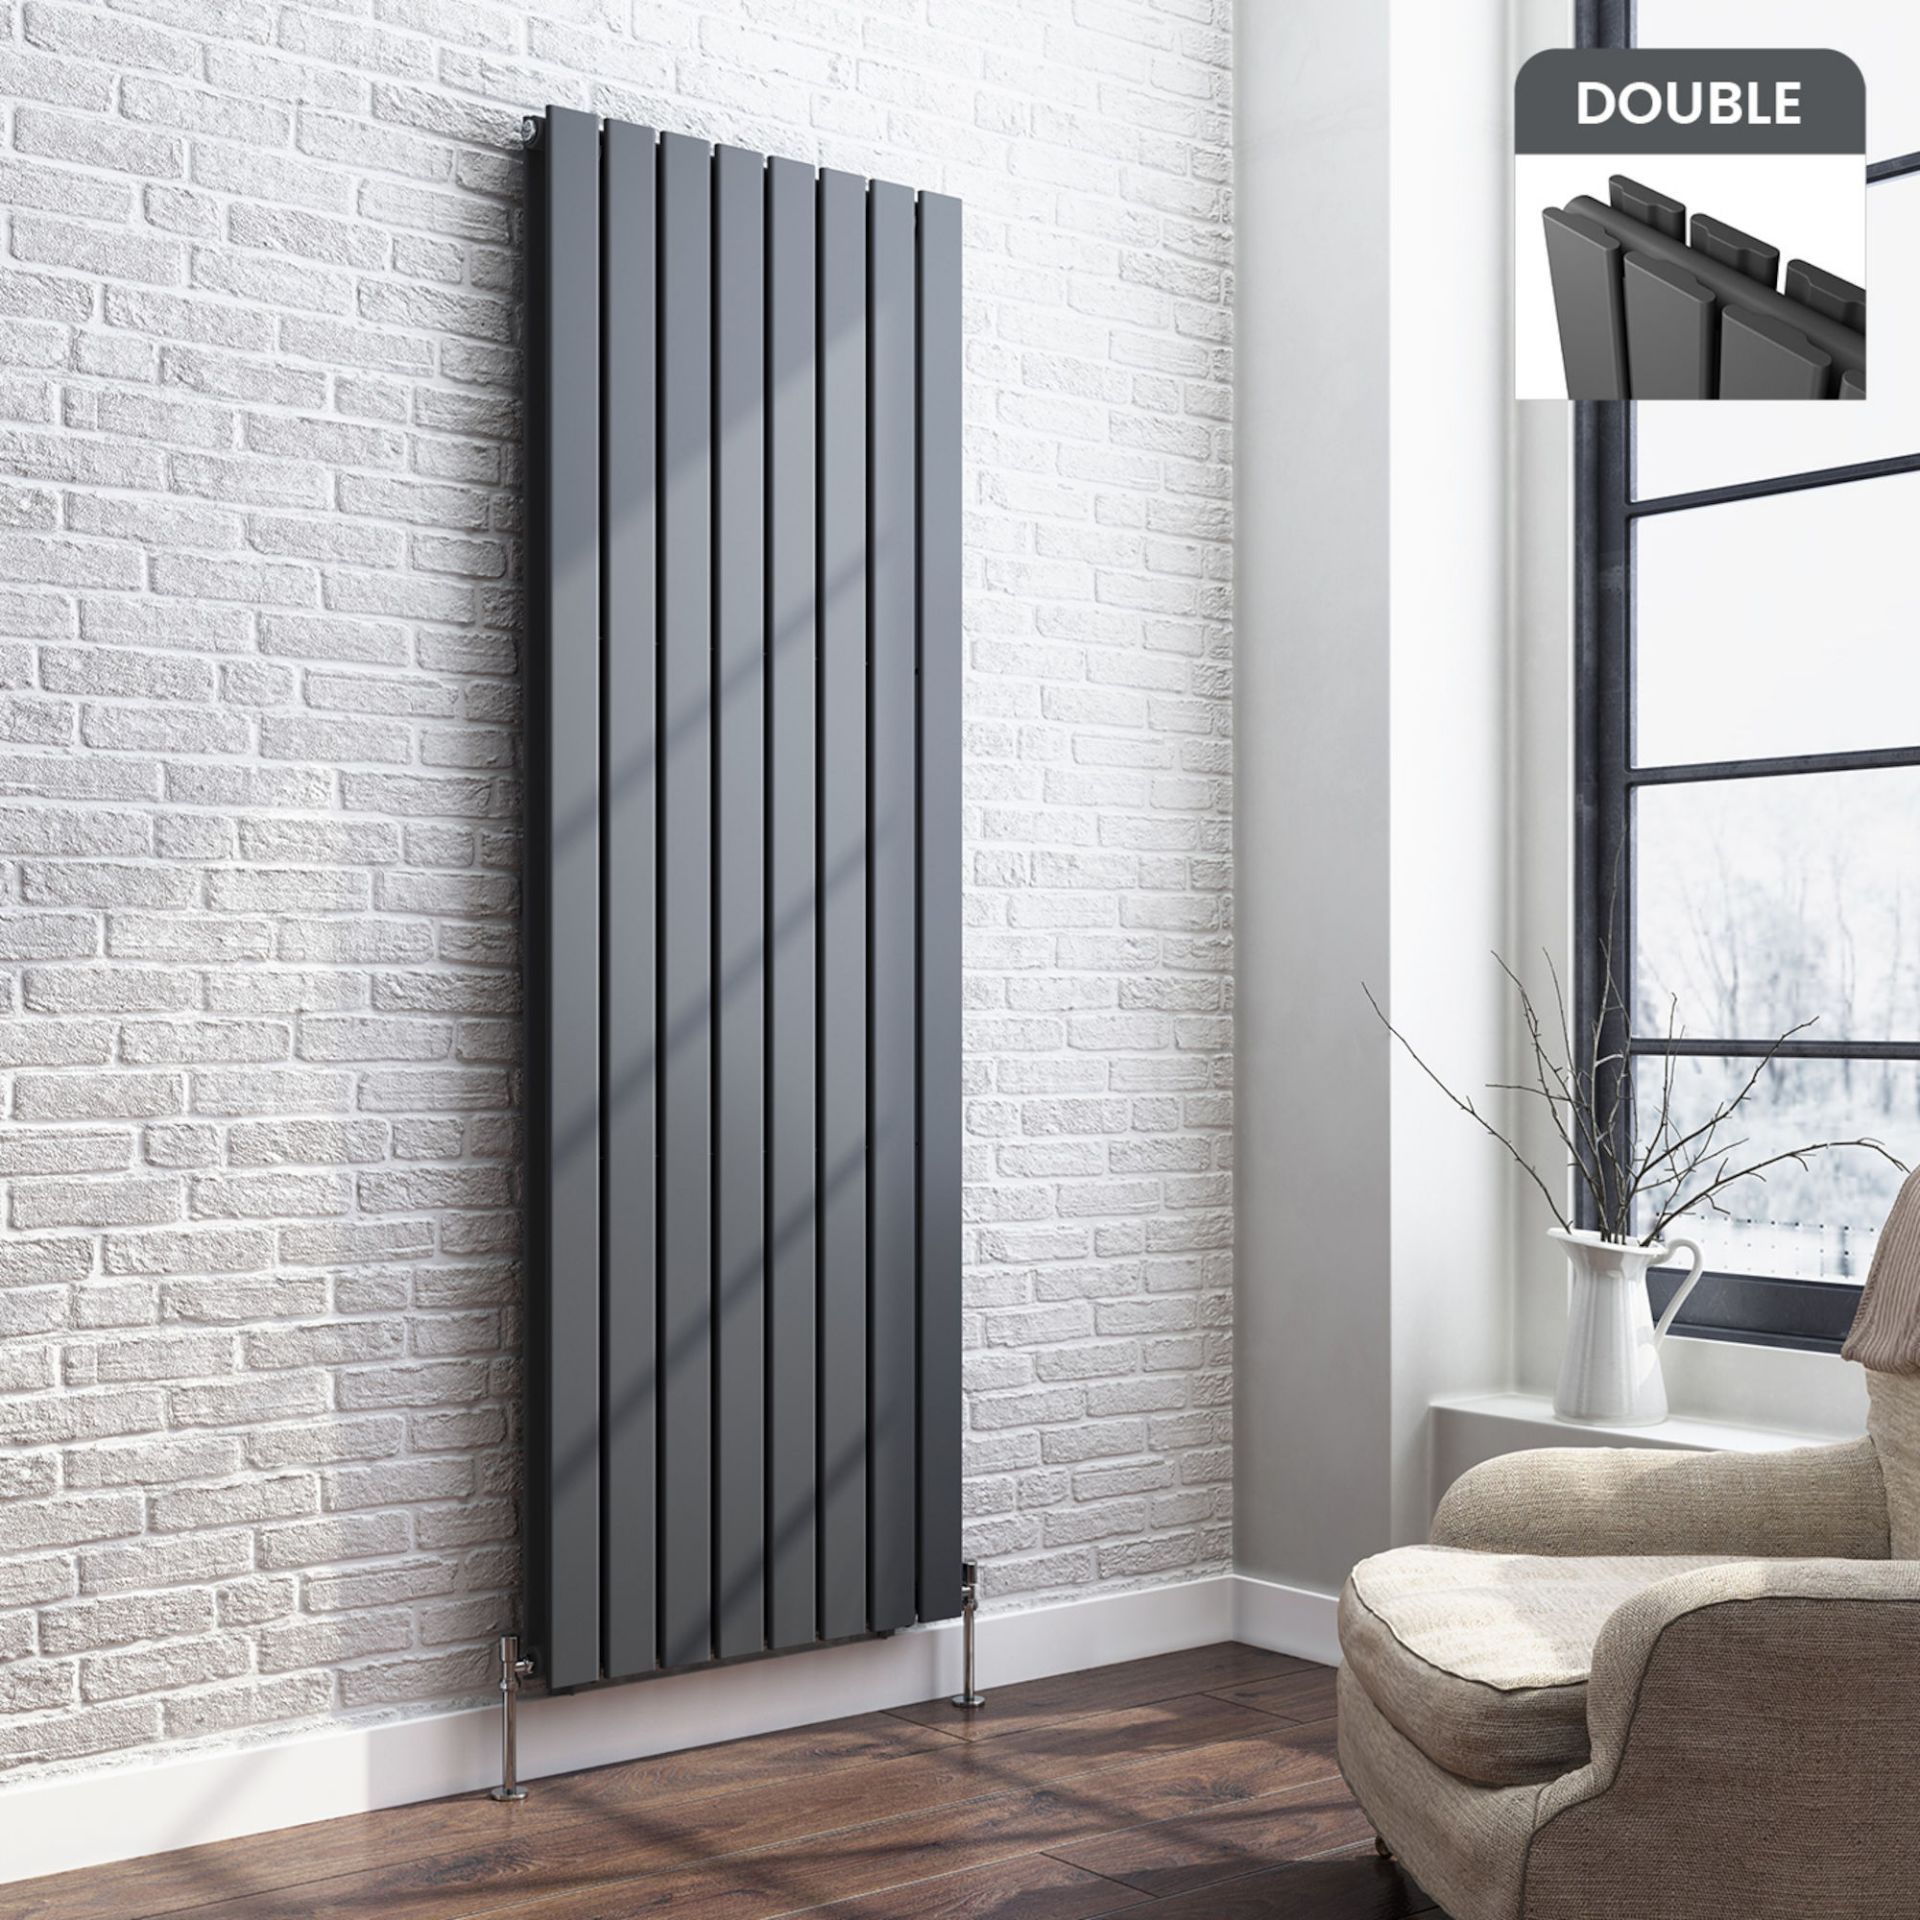 (ED111) 1800x608mm Anthracite Double Flat Panel Vertical Radiator - Premium. RRP £499.99. Made